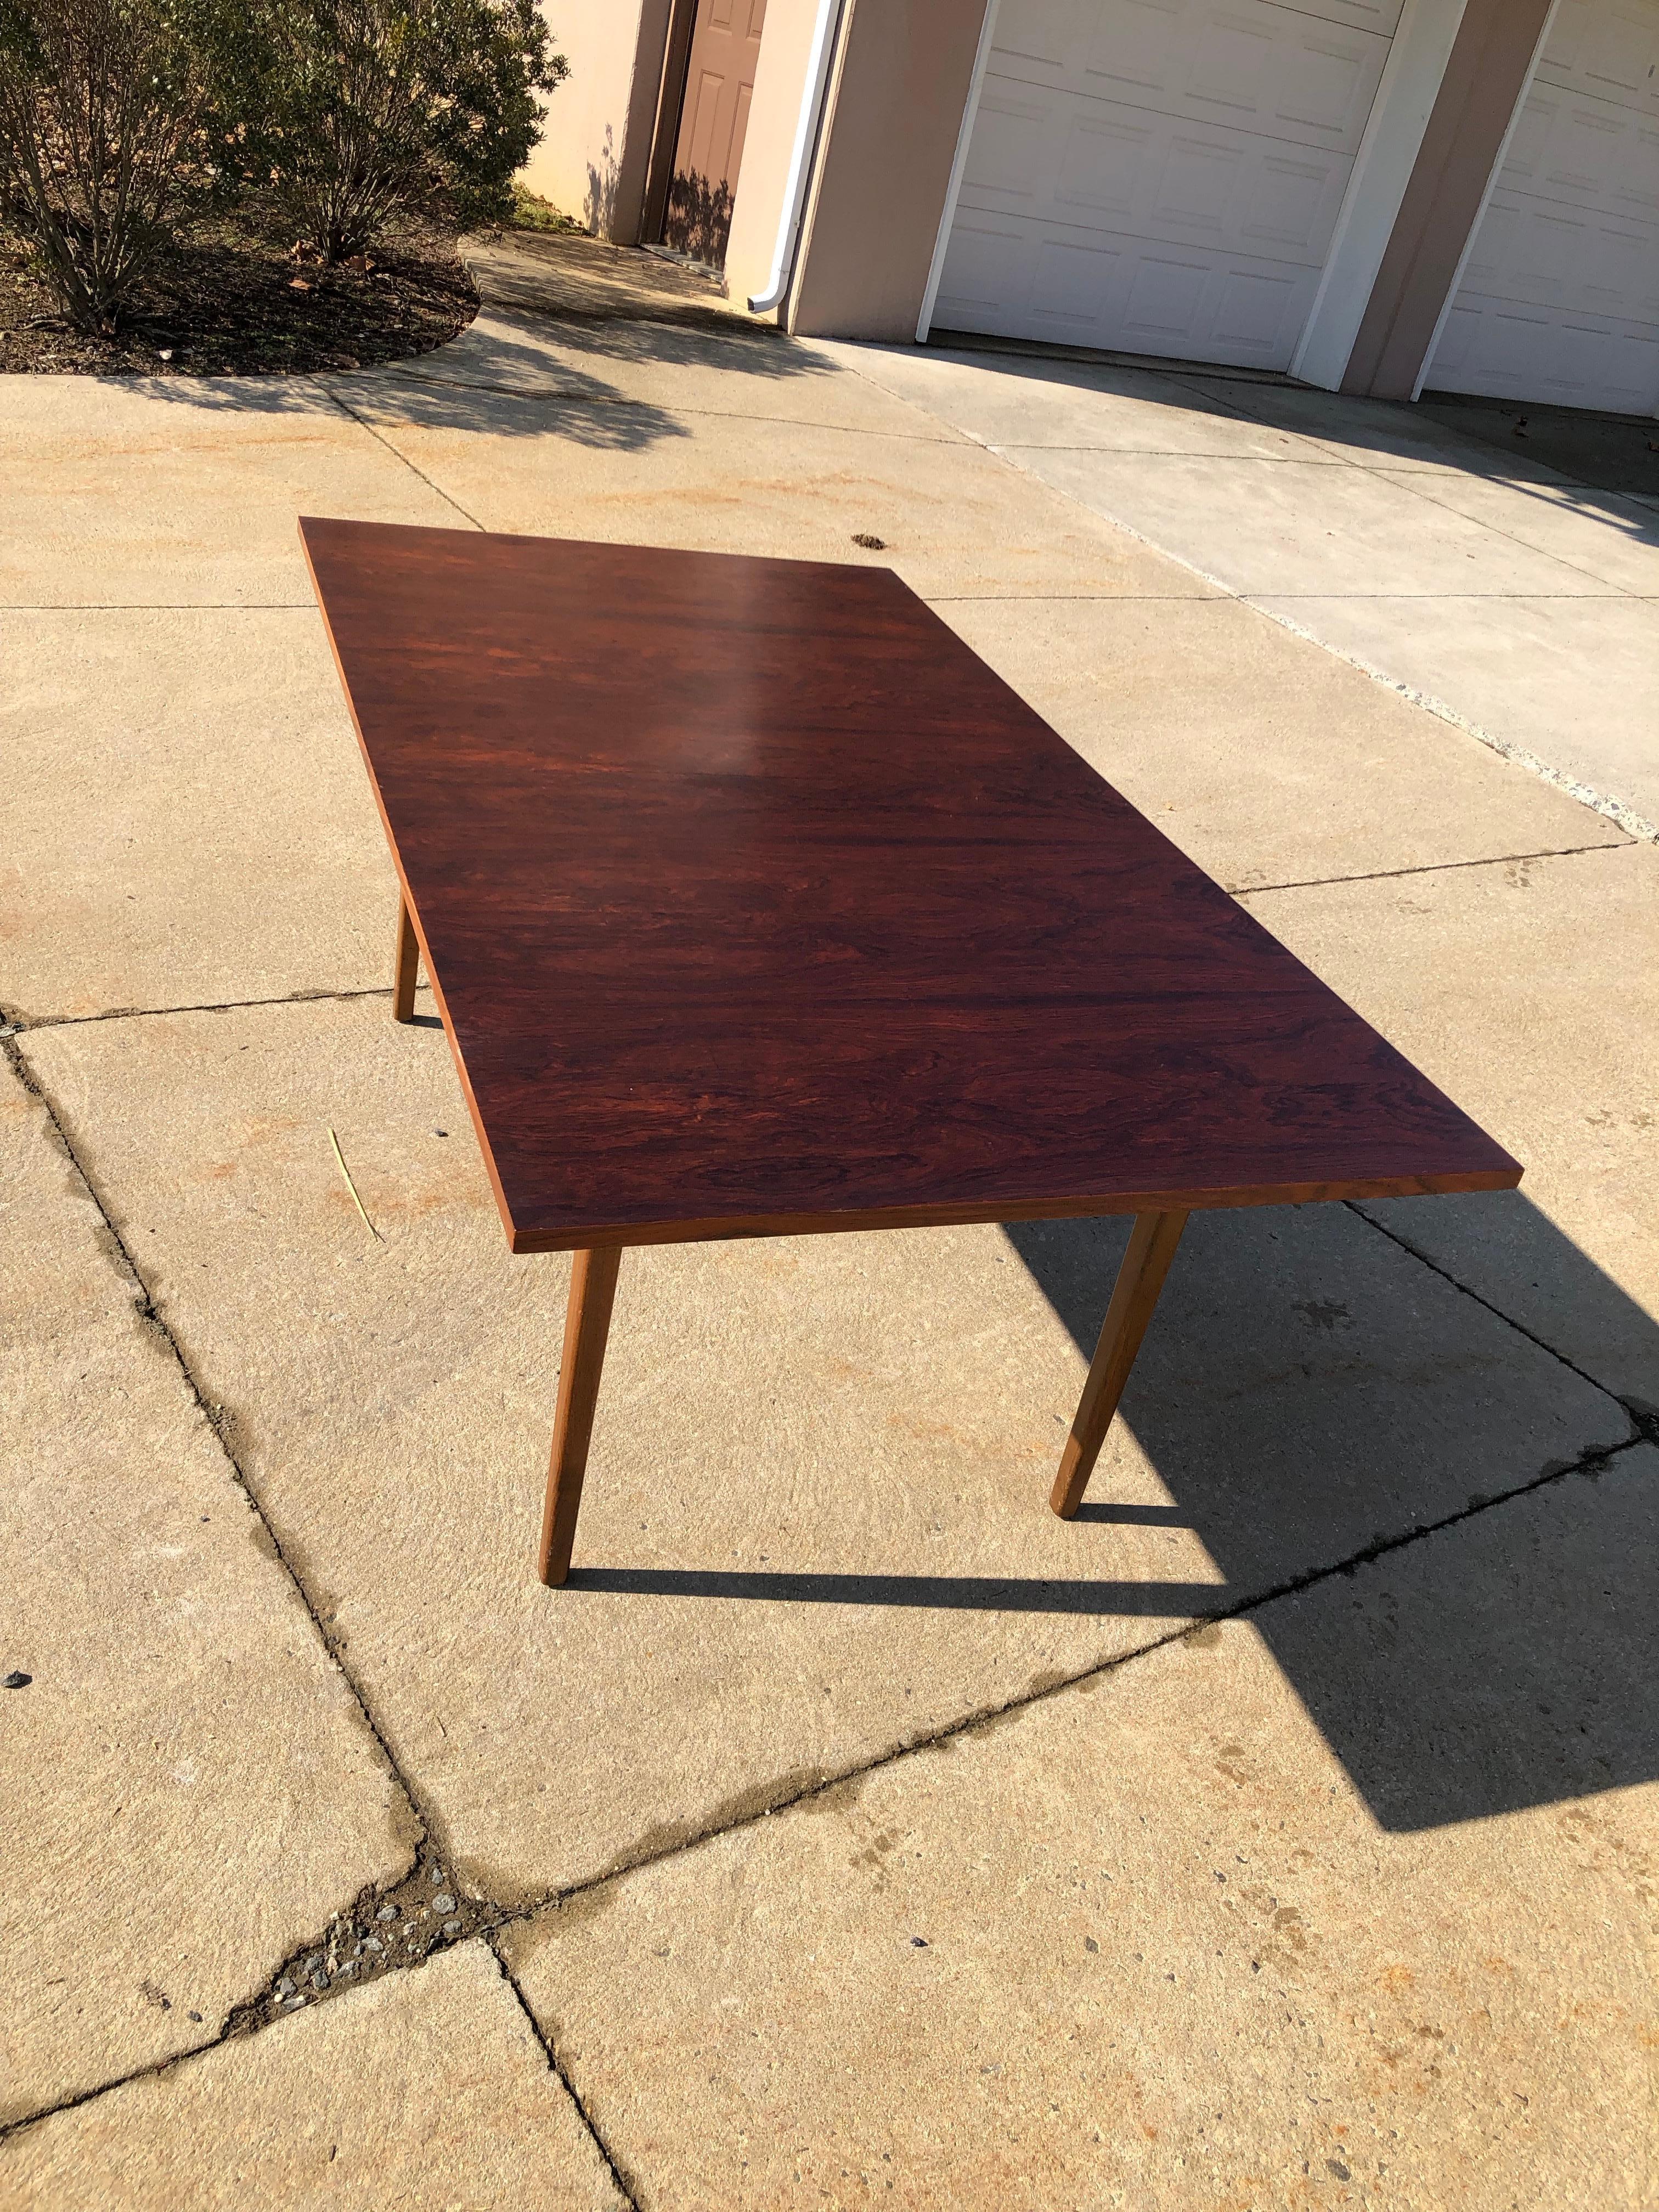 Edward Wormley for Dunbar Brazilian rosewood dining table. Table is 72 inches long and has two 12 inch leaves thus expanding up to 98 inches. All original.